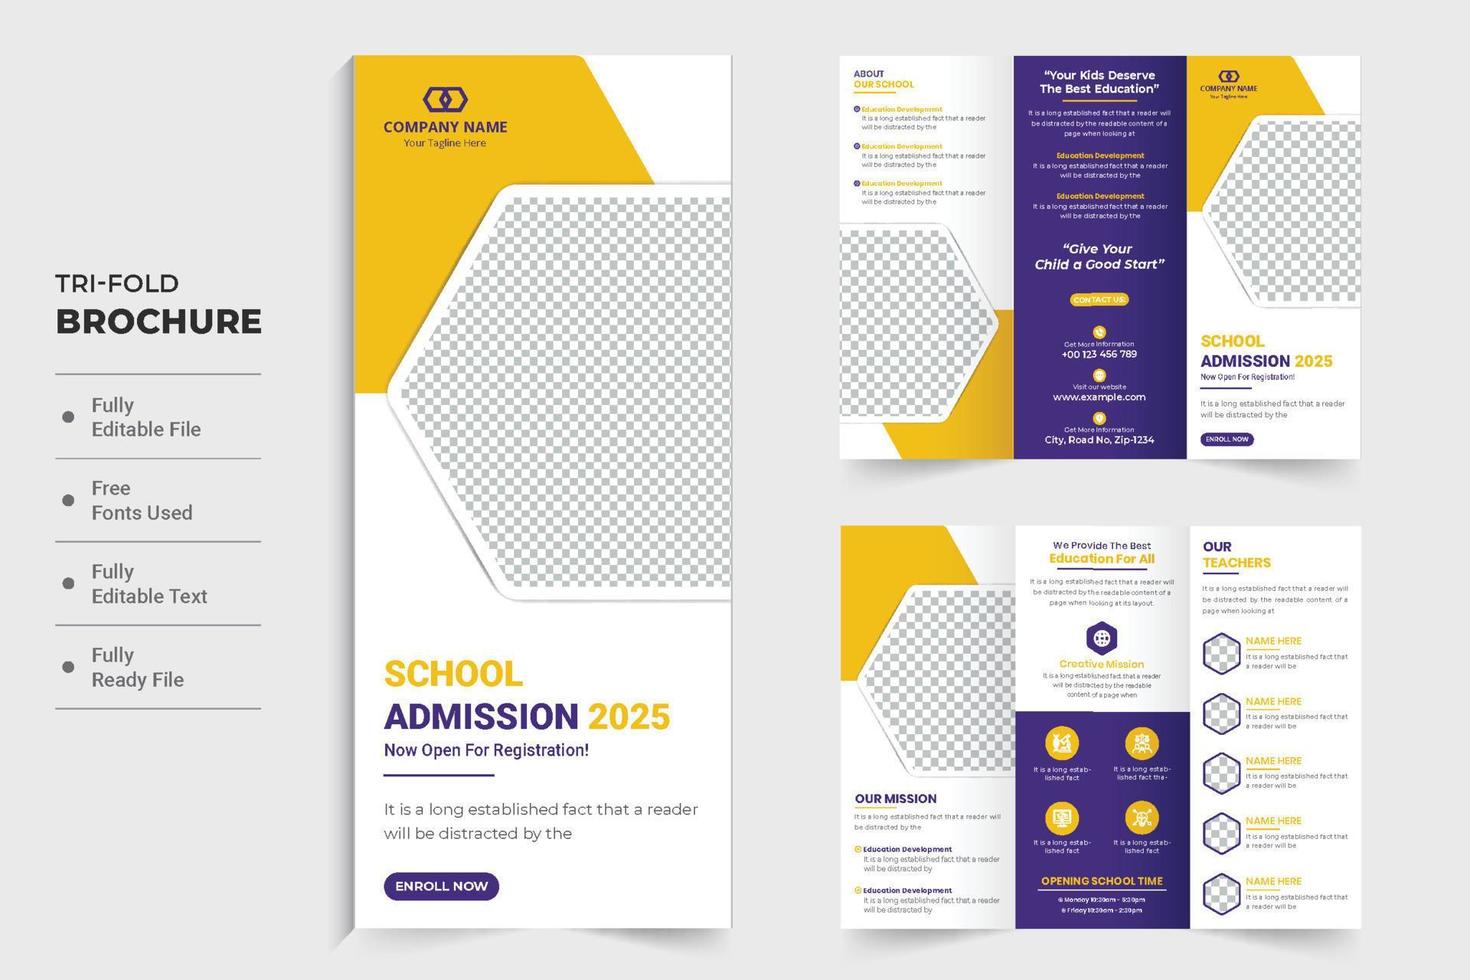 School admission and educational brochure design for marketing. Academic leaflet and trifold brochure with school activities section. Back to school trifold brochure design with photo placeholders. vector